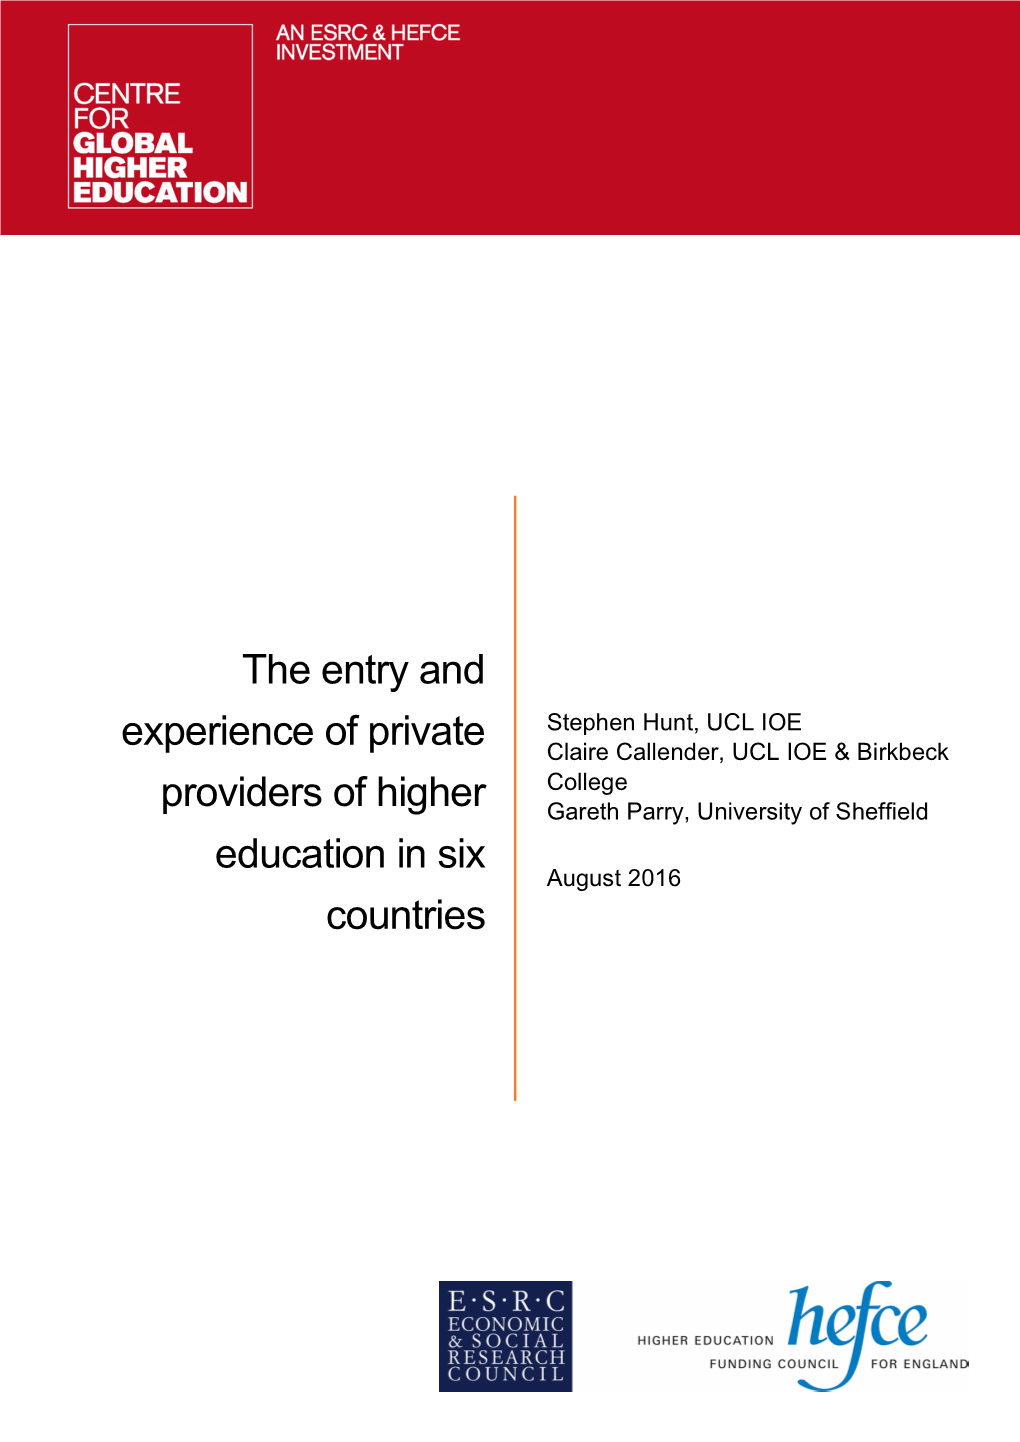 The Entry and Experience of Private Providers of Higher Education in Six